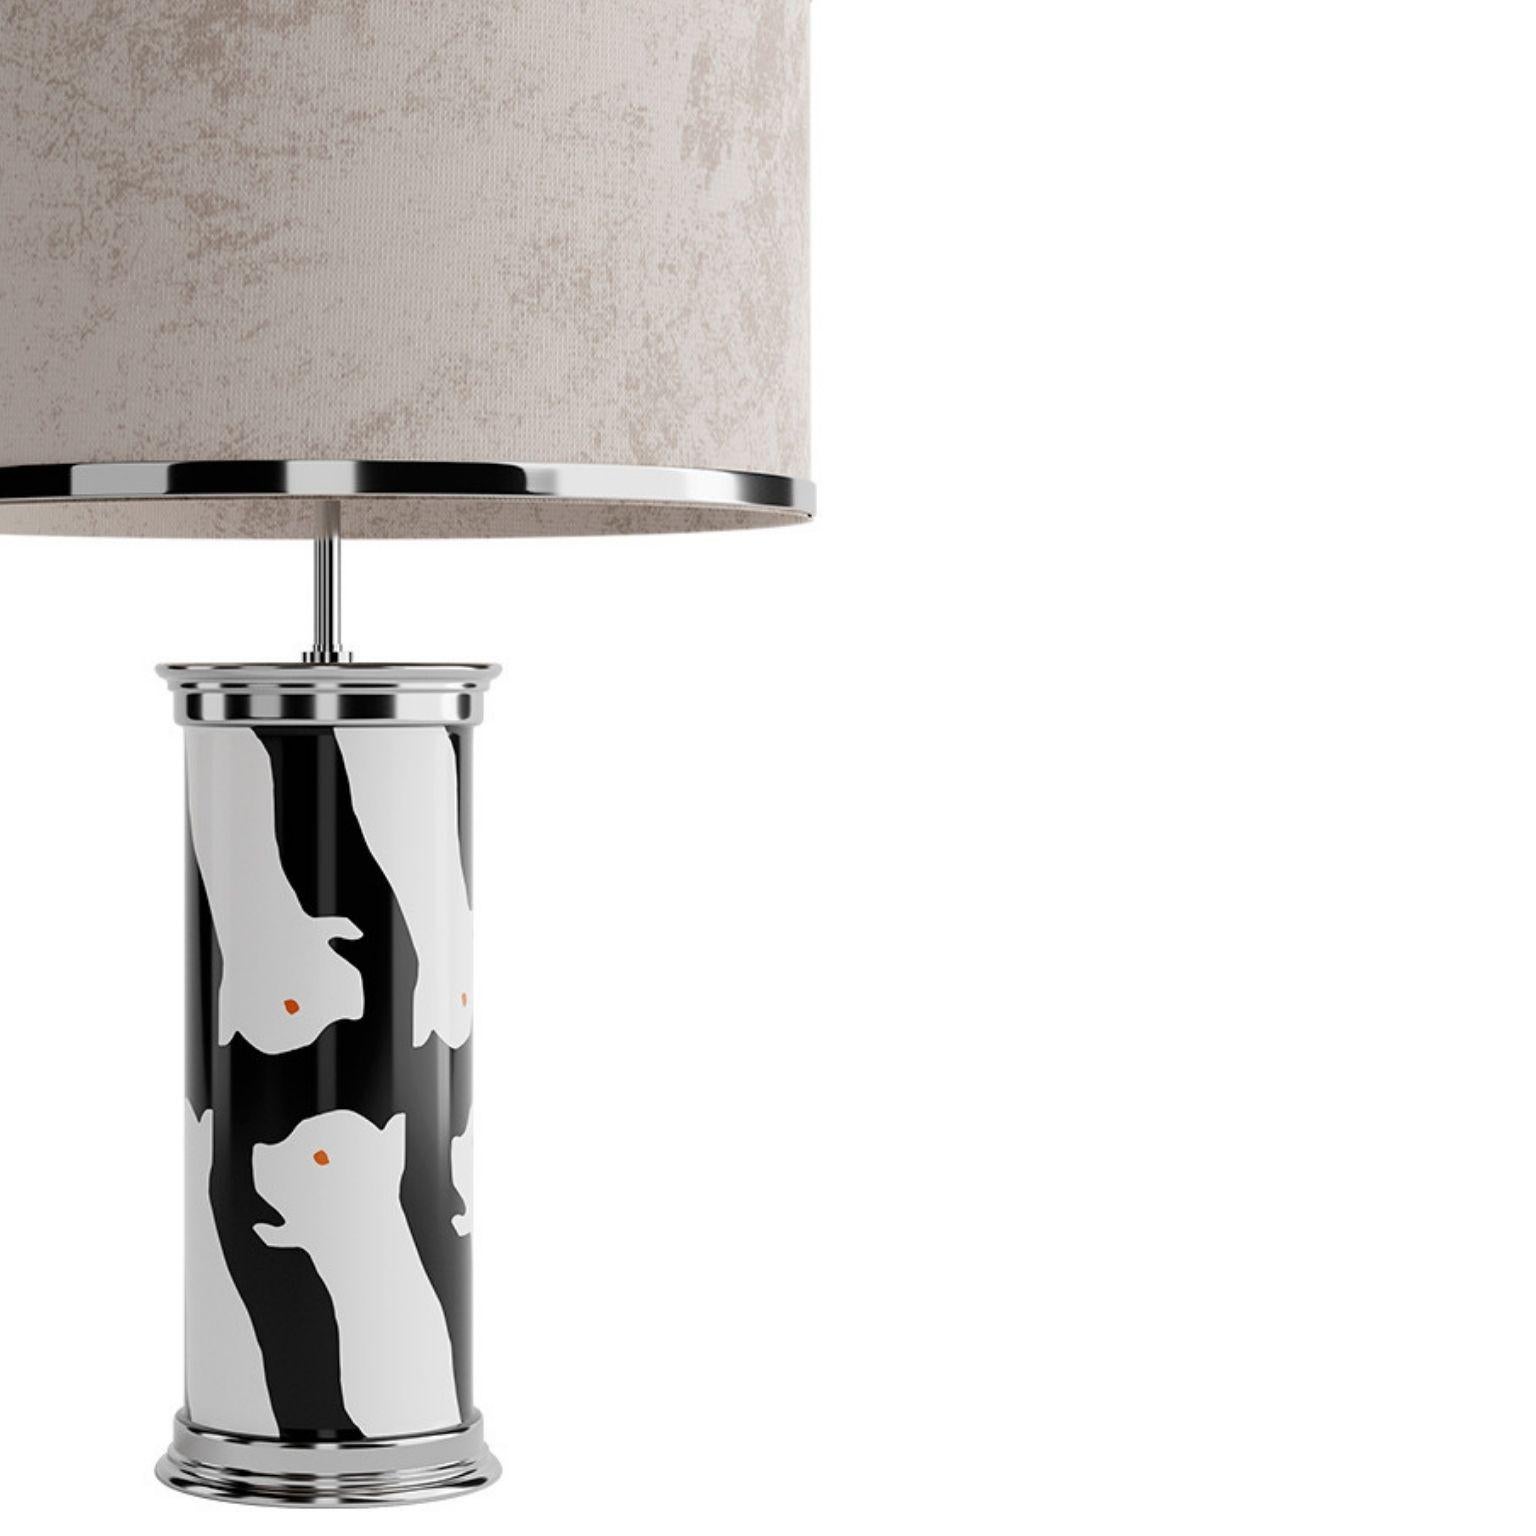 Portuguese Hand-Painted Eclipse Table Lamp, an Handmade Grey, Black and White Decor Lamp For Sale